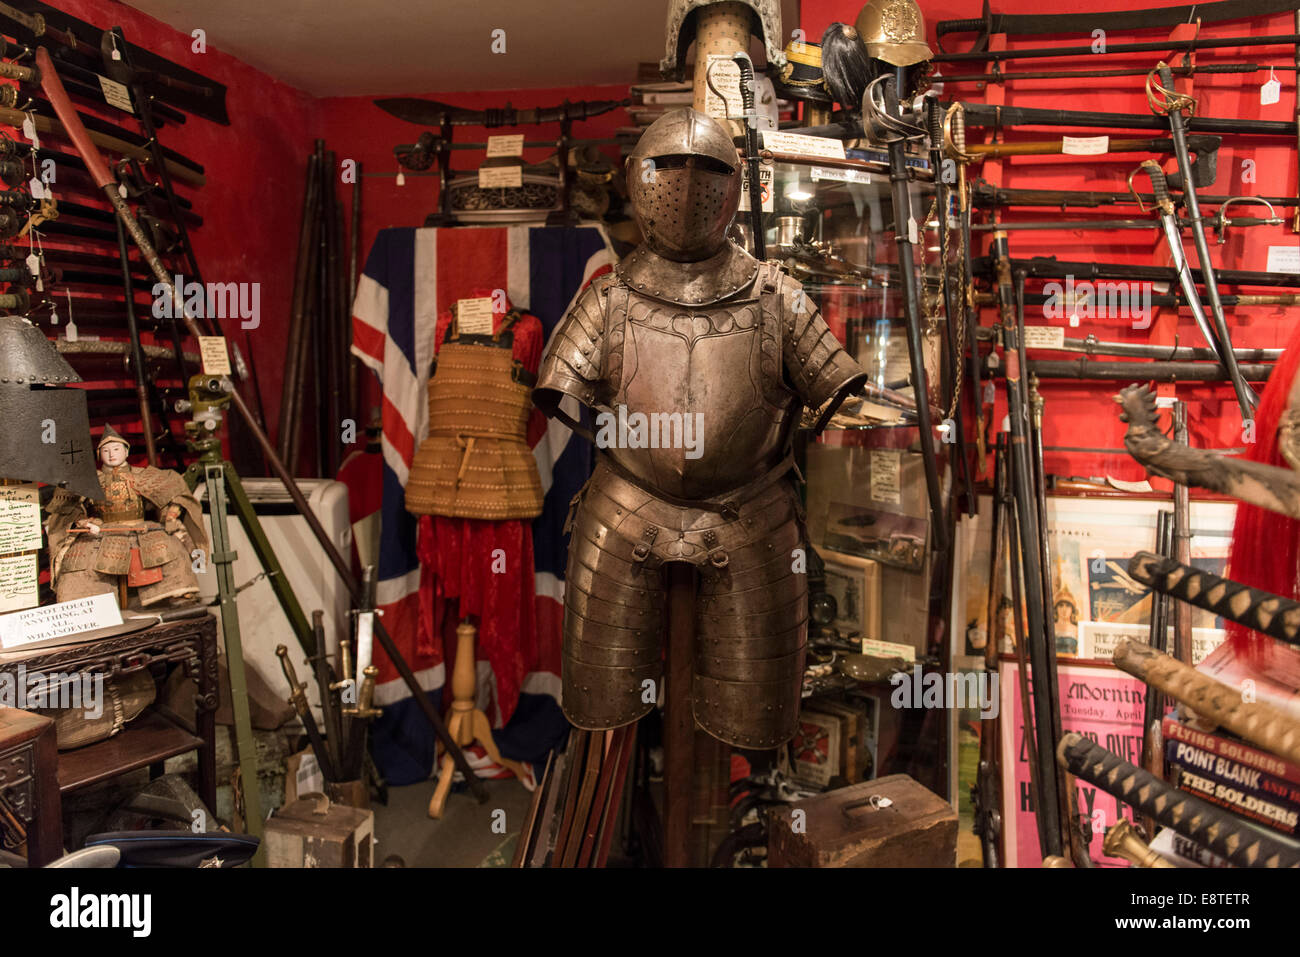 Interior of The Lanes Armory shop in Brighton selling militaria historical ephemera & interesting items from around the world Stock Photo